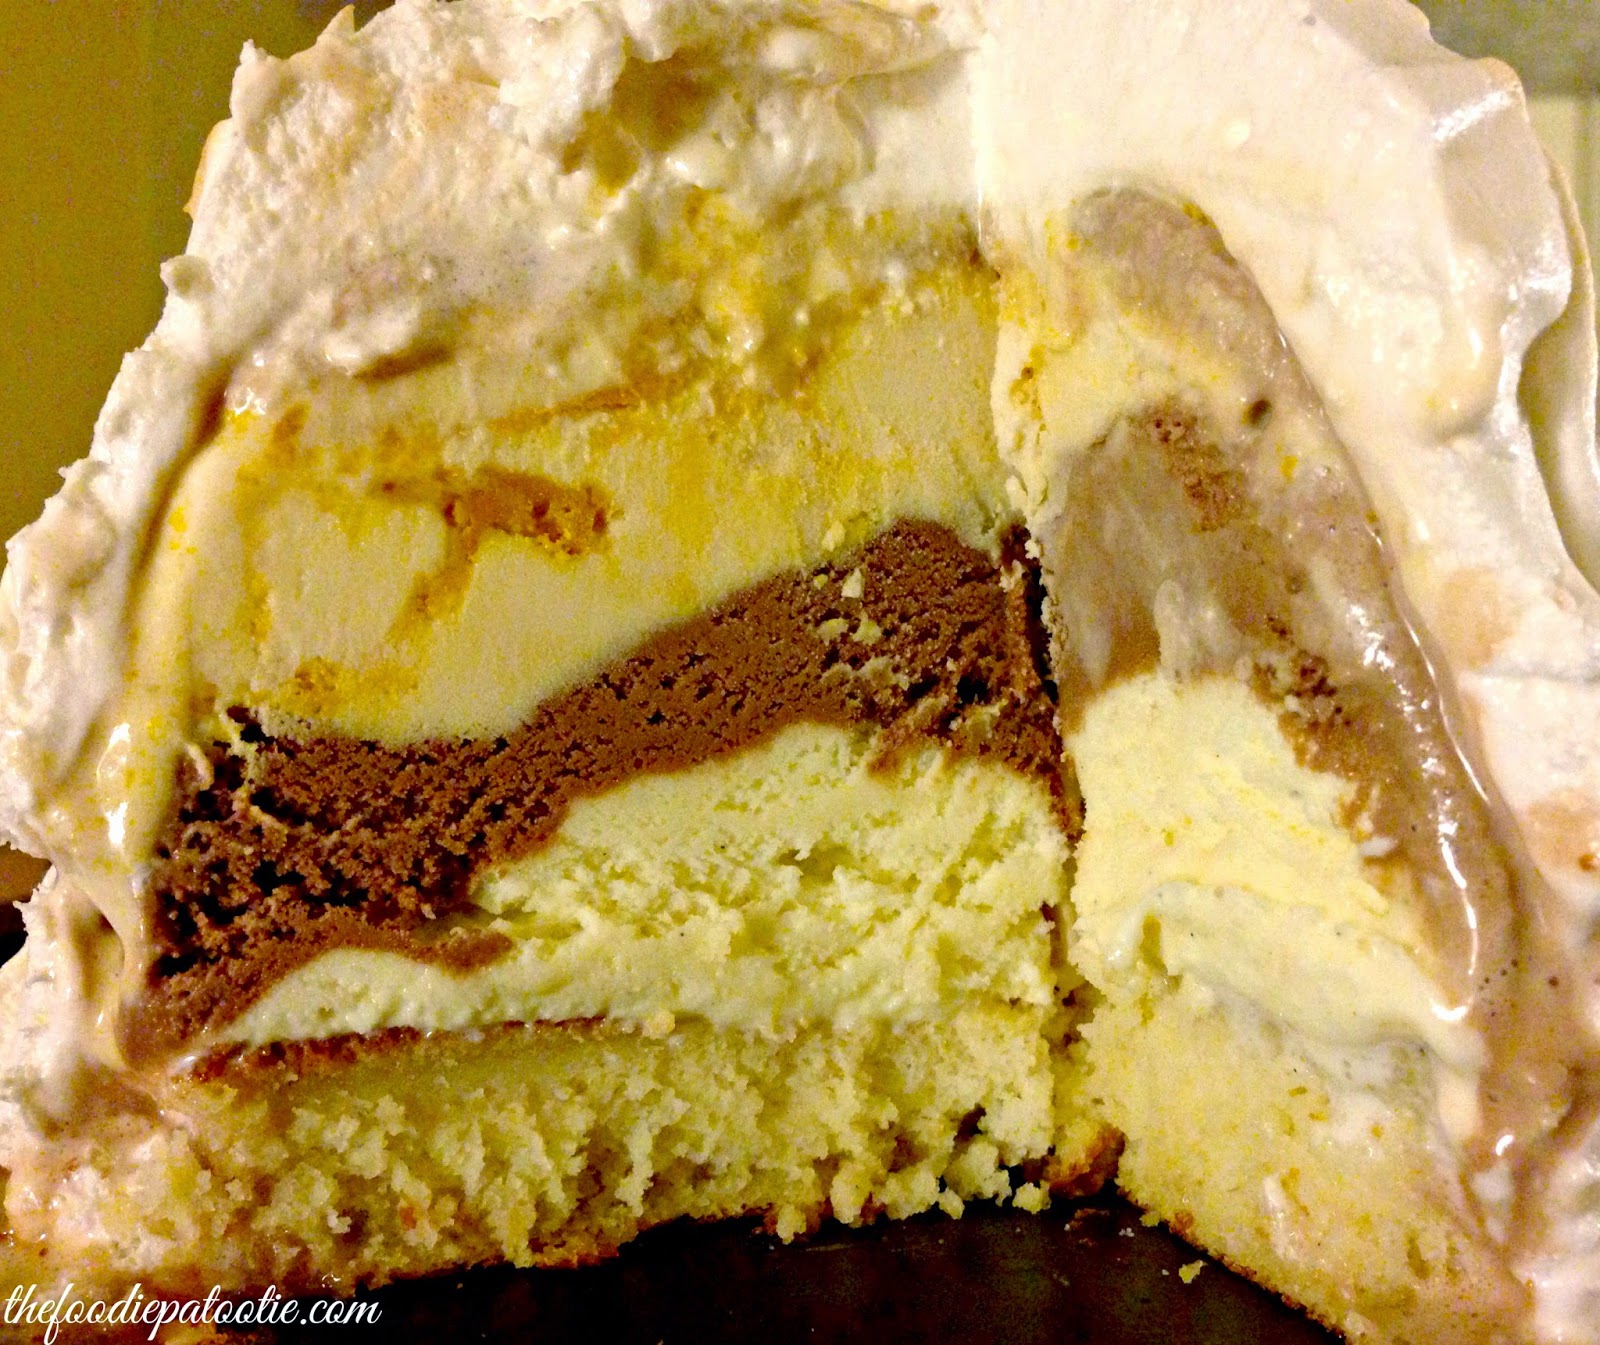 http://thefoodiepatootie.com/recipes/national-baked-alaska-day/